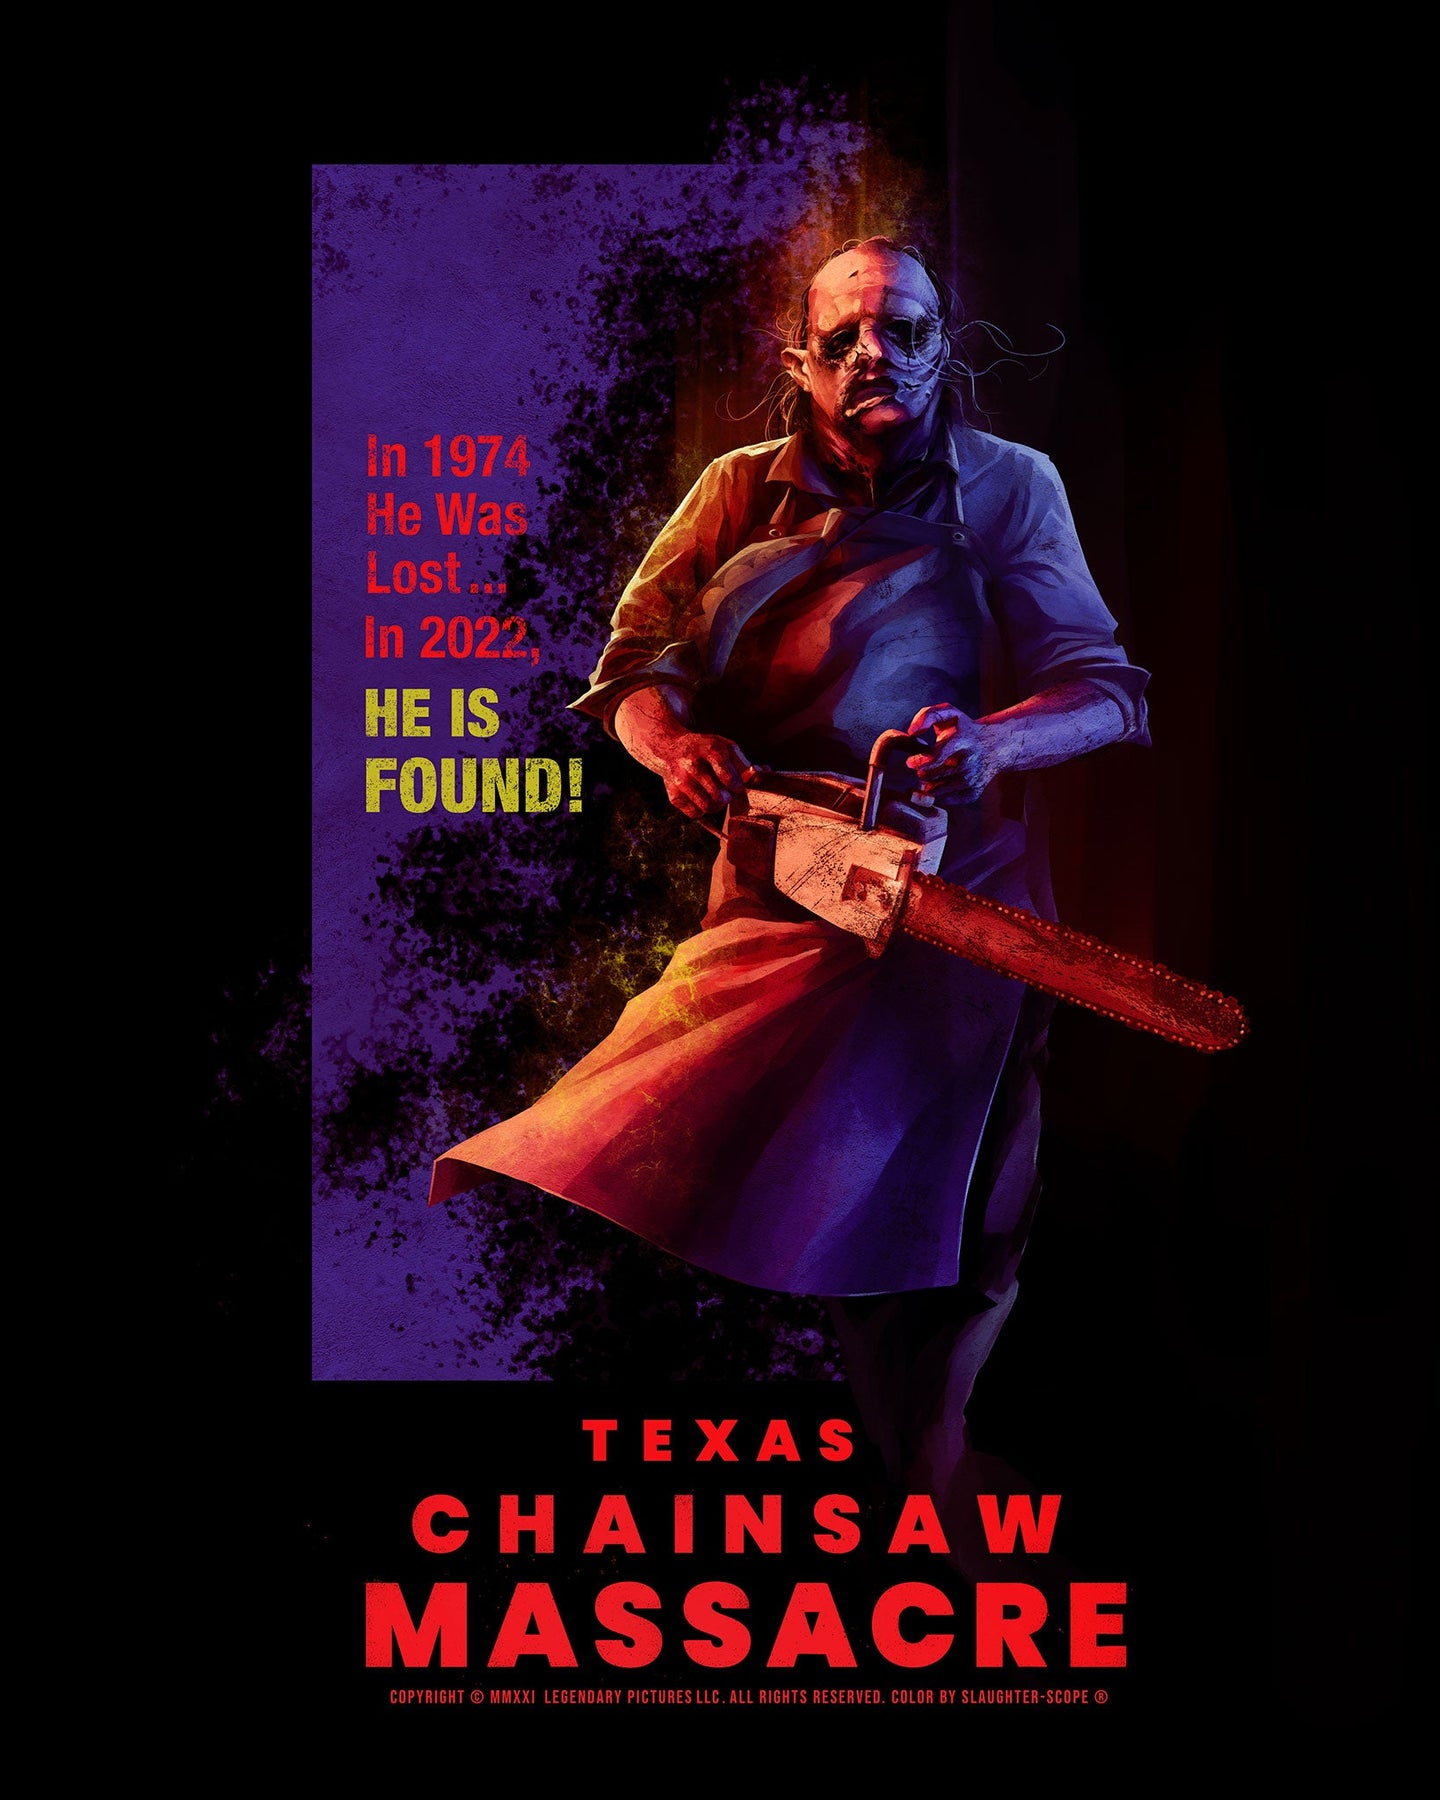 Texas Chainsaw Massacre Movie Review - The Blue and Gold